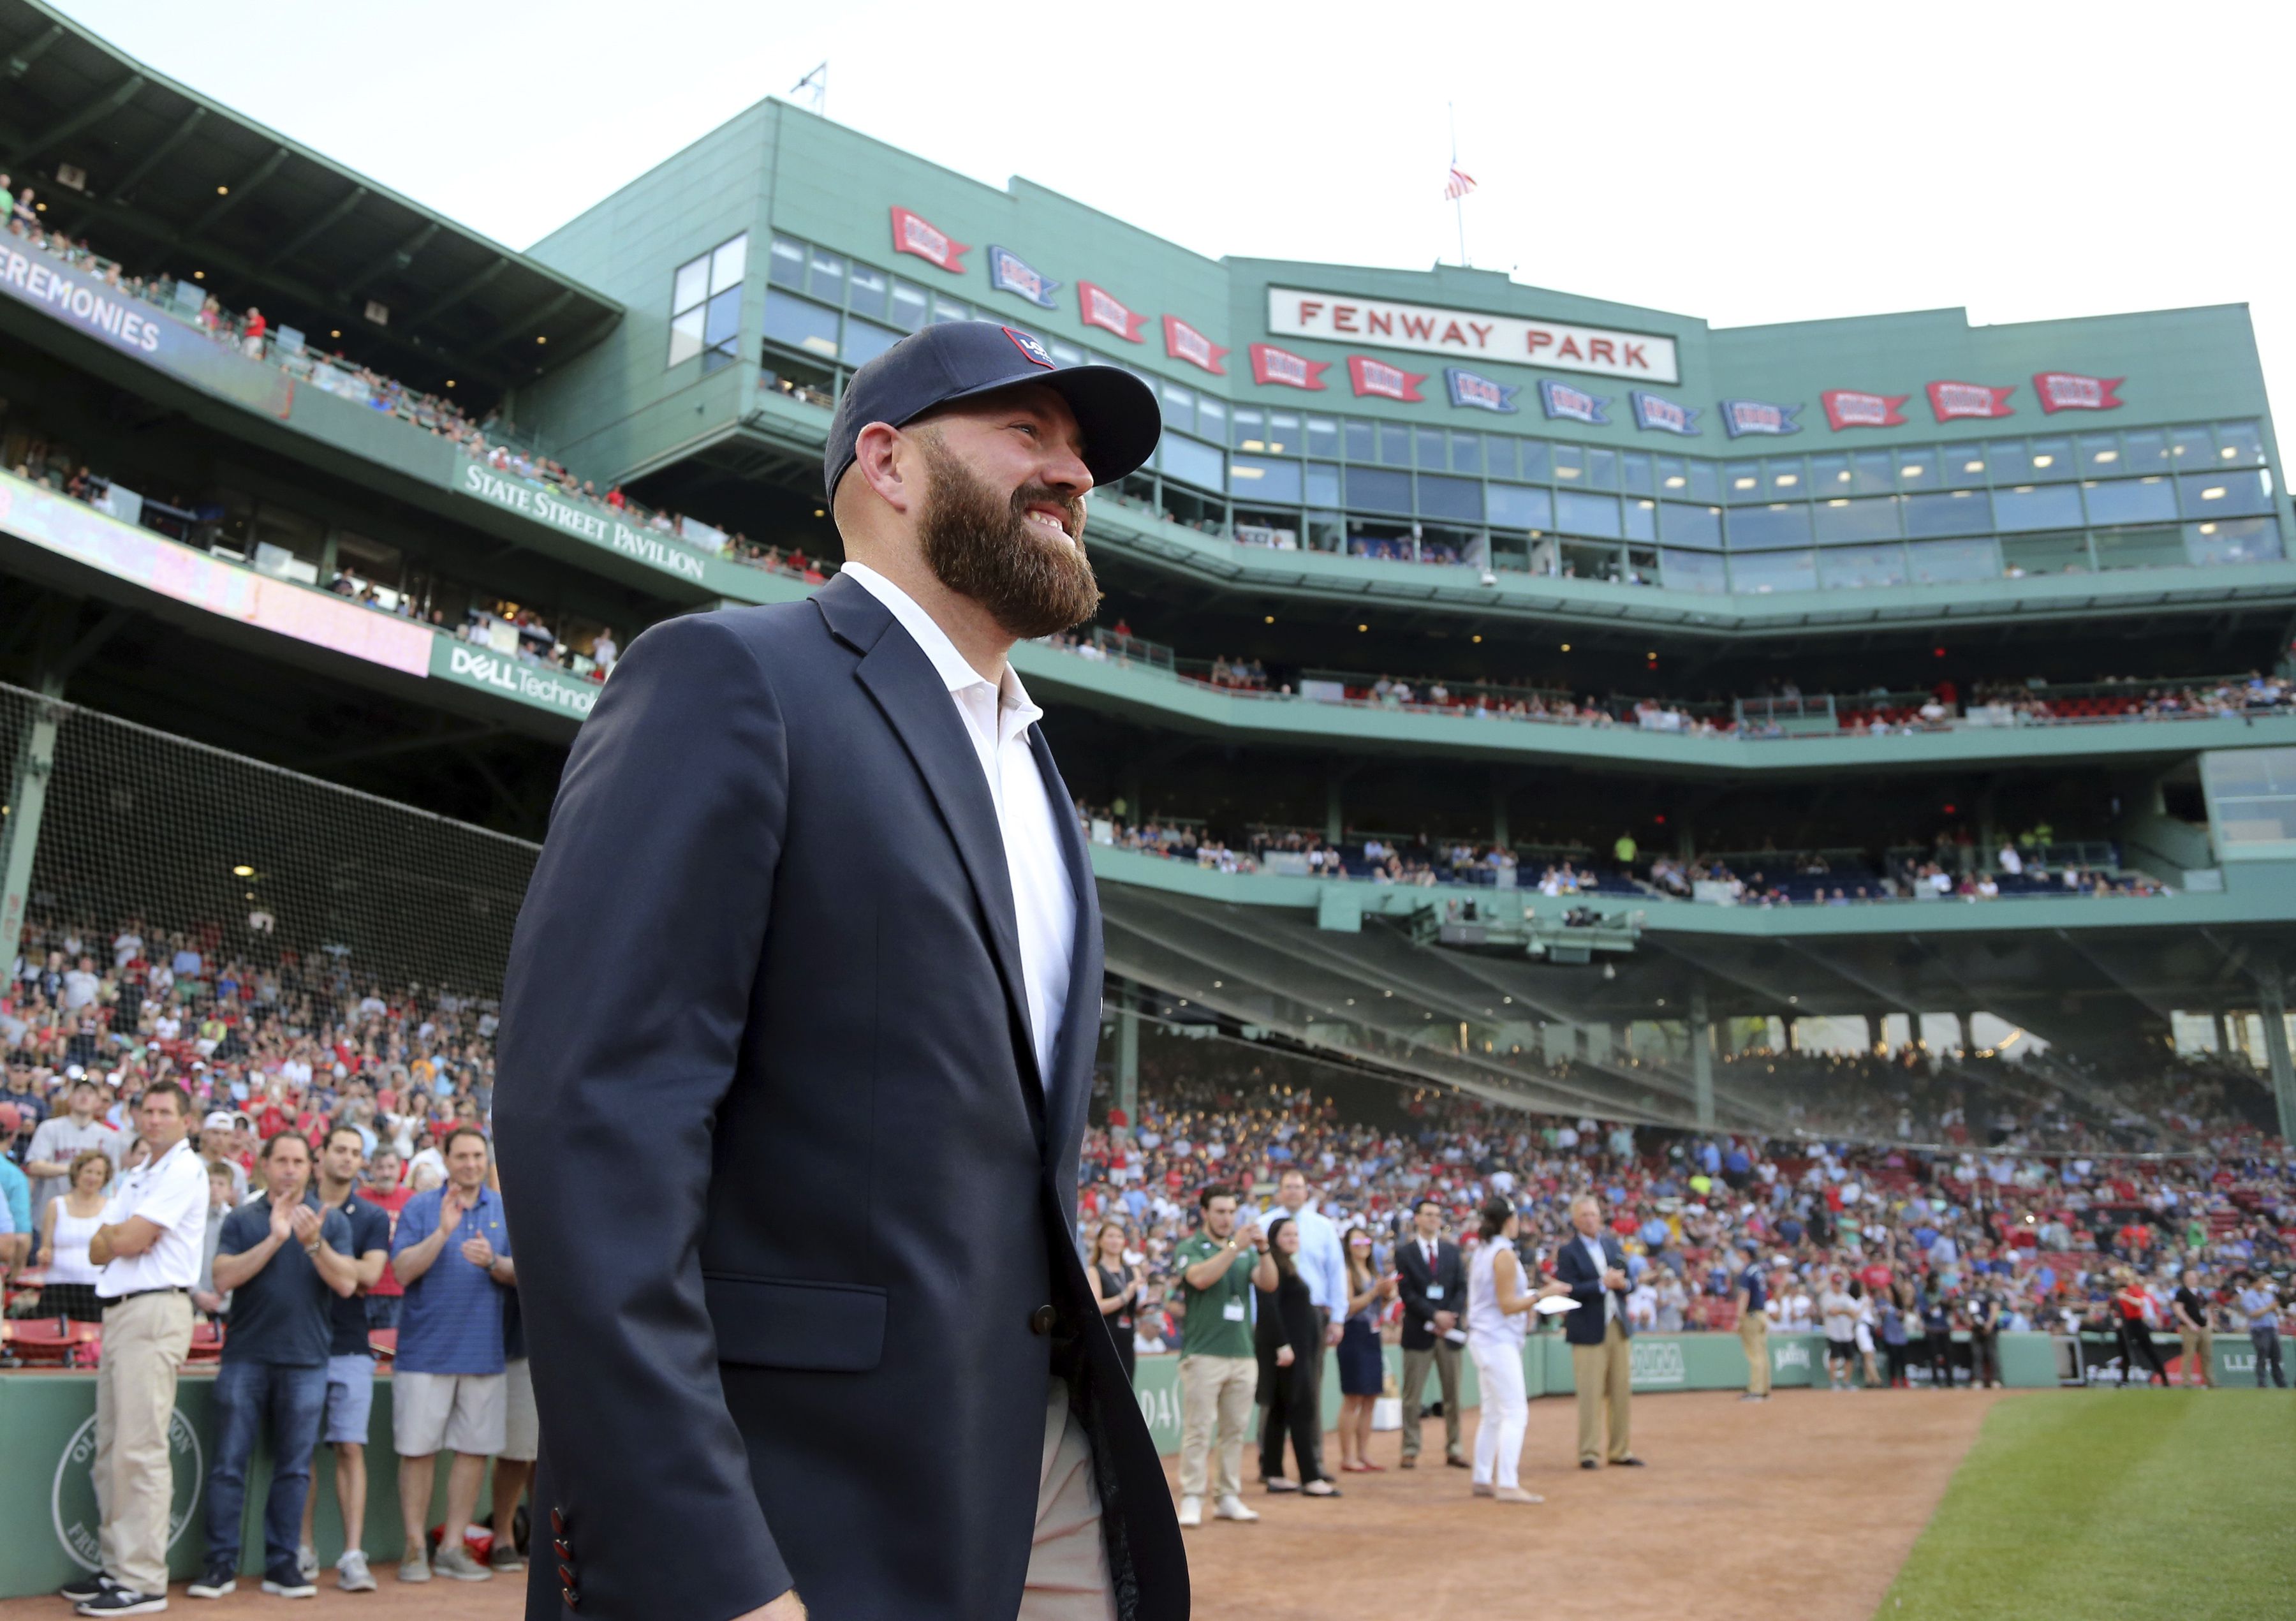 Kevin Youkilis, Boston Red Sox Hall of Famer, has seen brewery